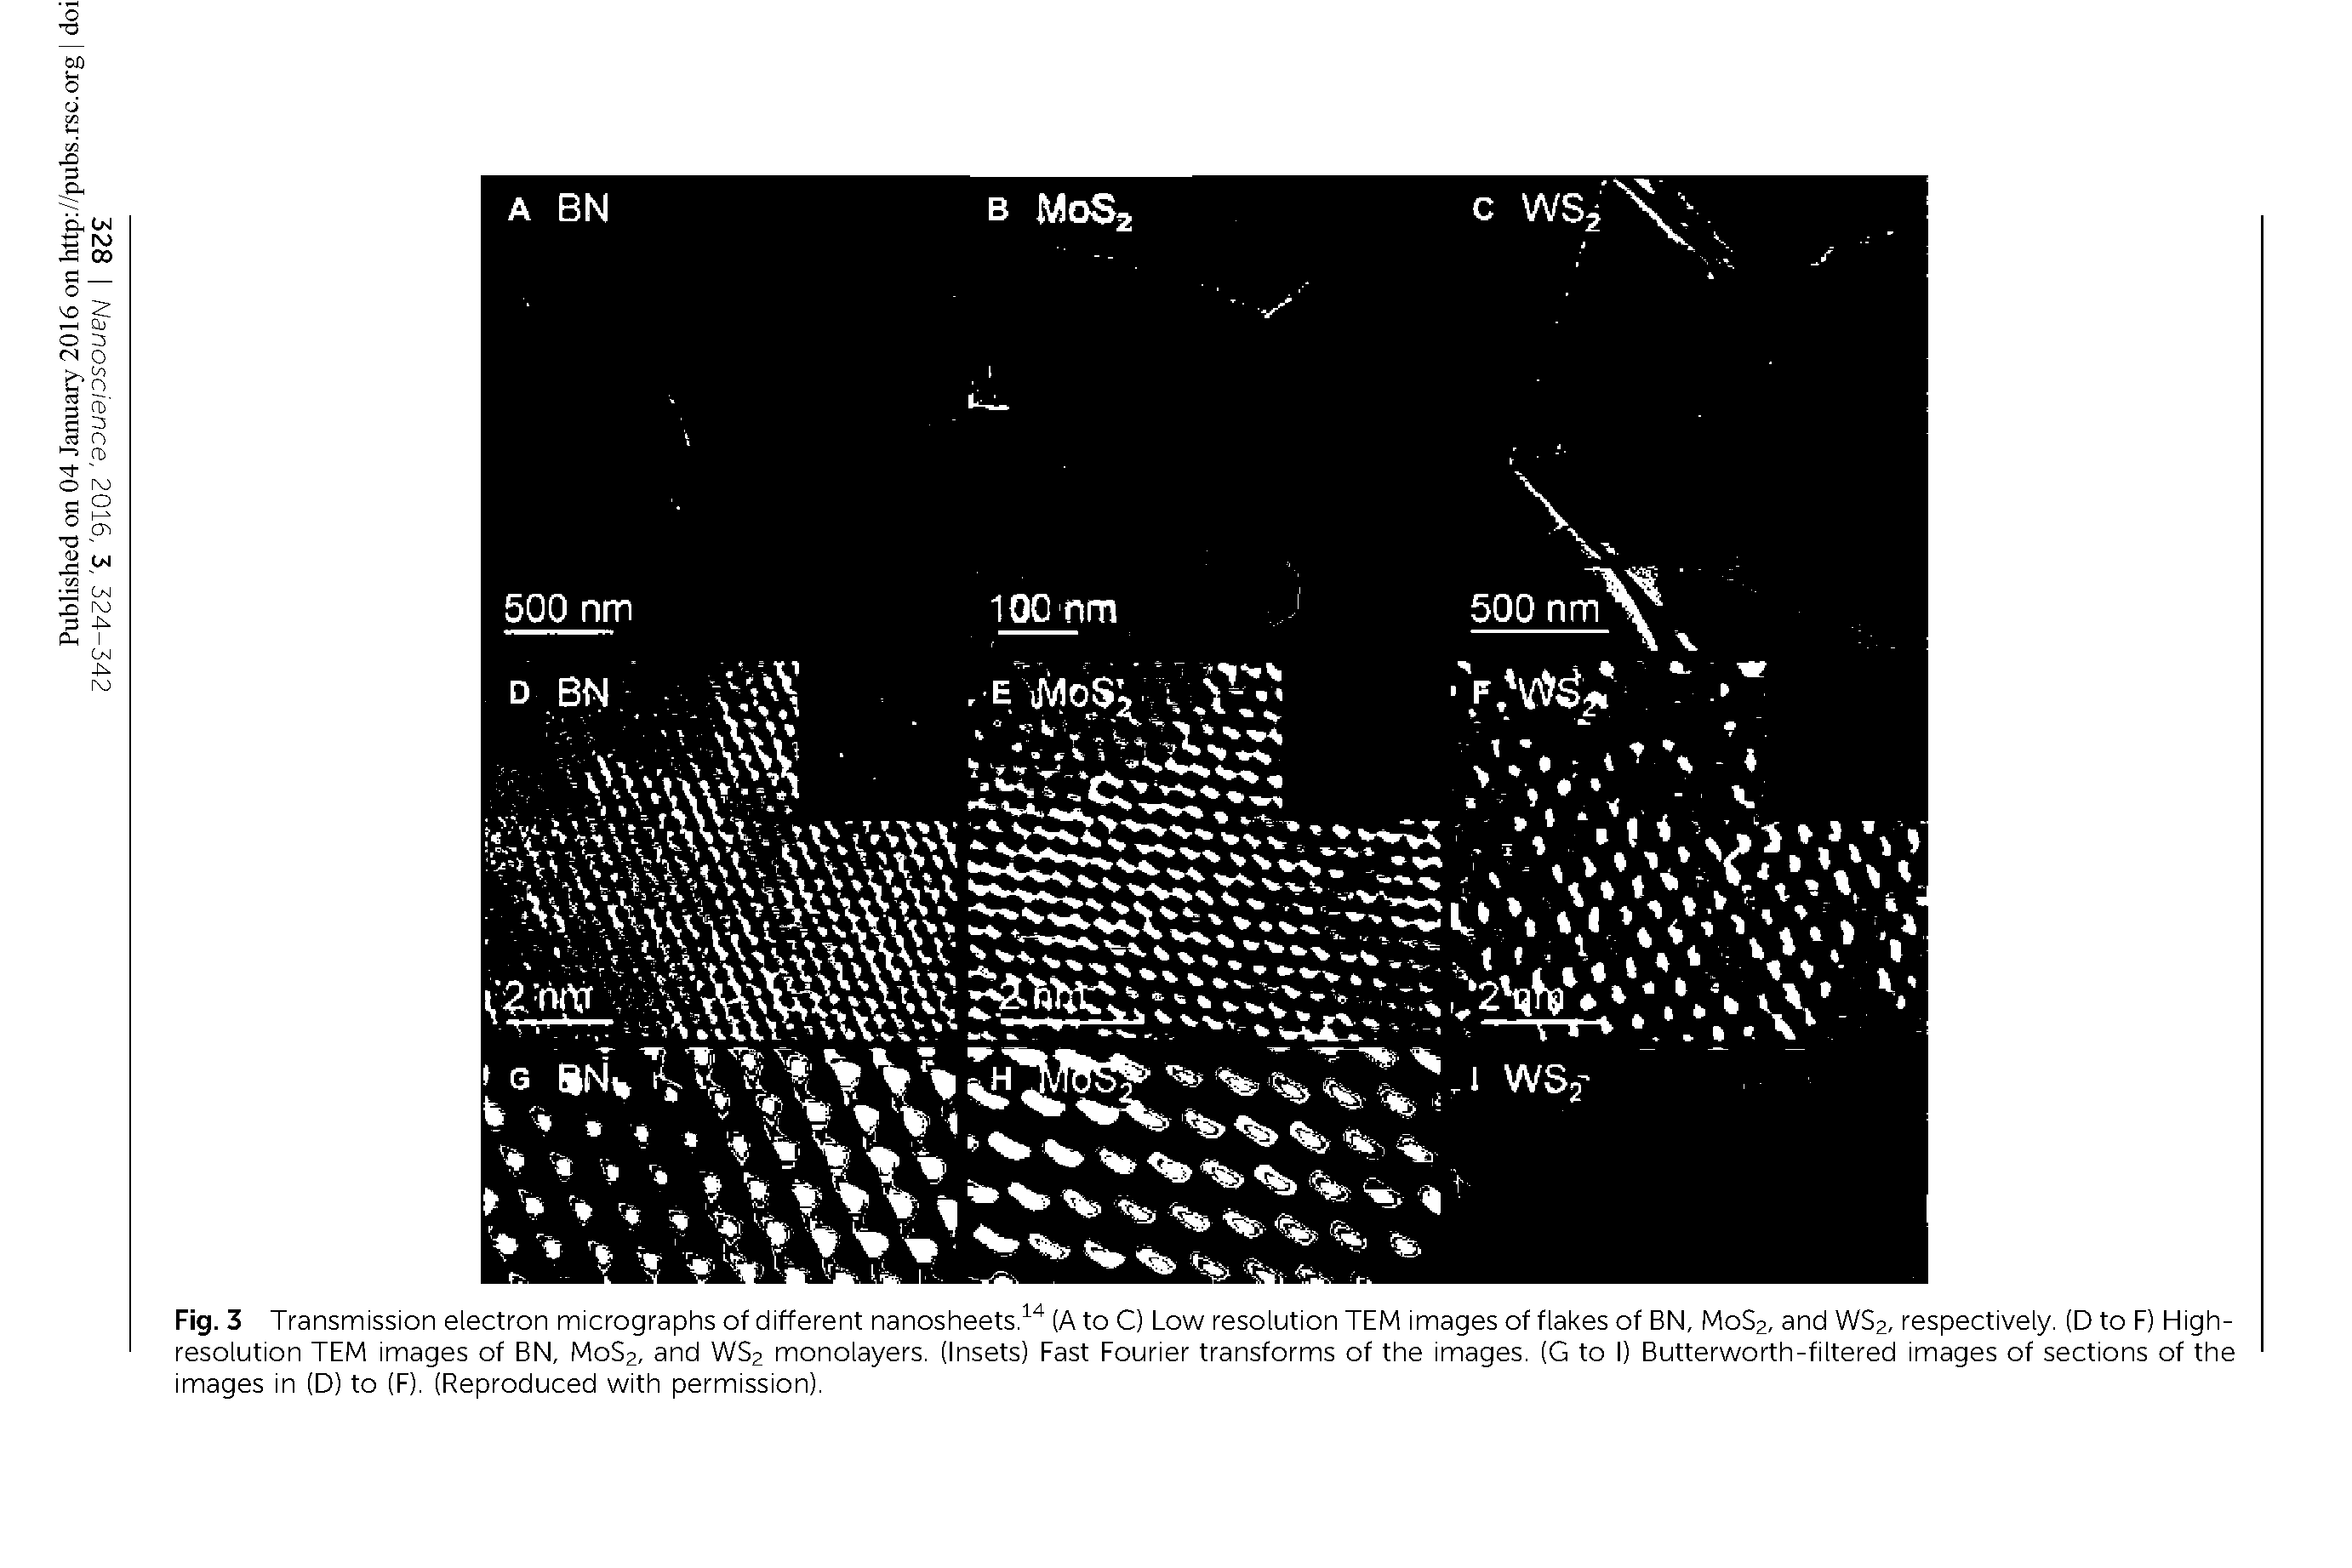 Fig. 3 Transmission electron micrographs of different nanosheets.(A to C) Low resolution TEM images of flakes of BN, M0S2, and WS2, respectively. (D to F) High-resolution TEM images of BN, M0S2, and WS2 monolayers. (Insets) Fast Fourier transforms of the images. (G to I) Butterworth-filtered images of sections of the images in (D) to (F). (Reproduced with permission).